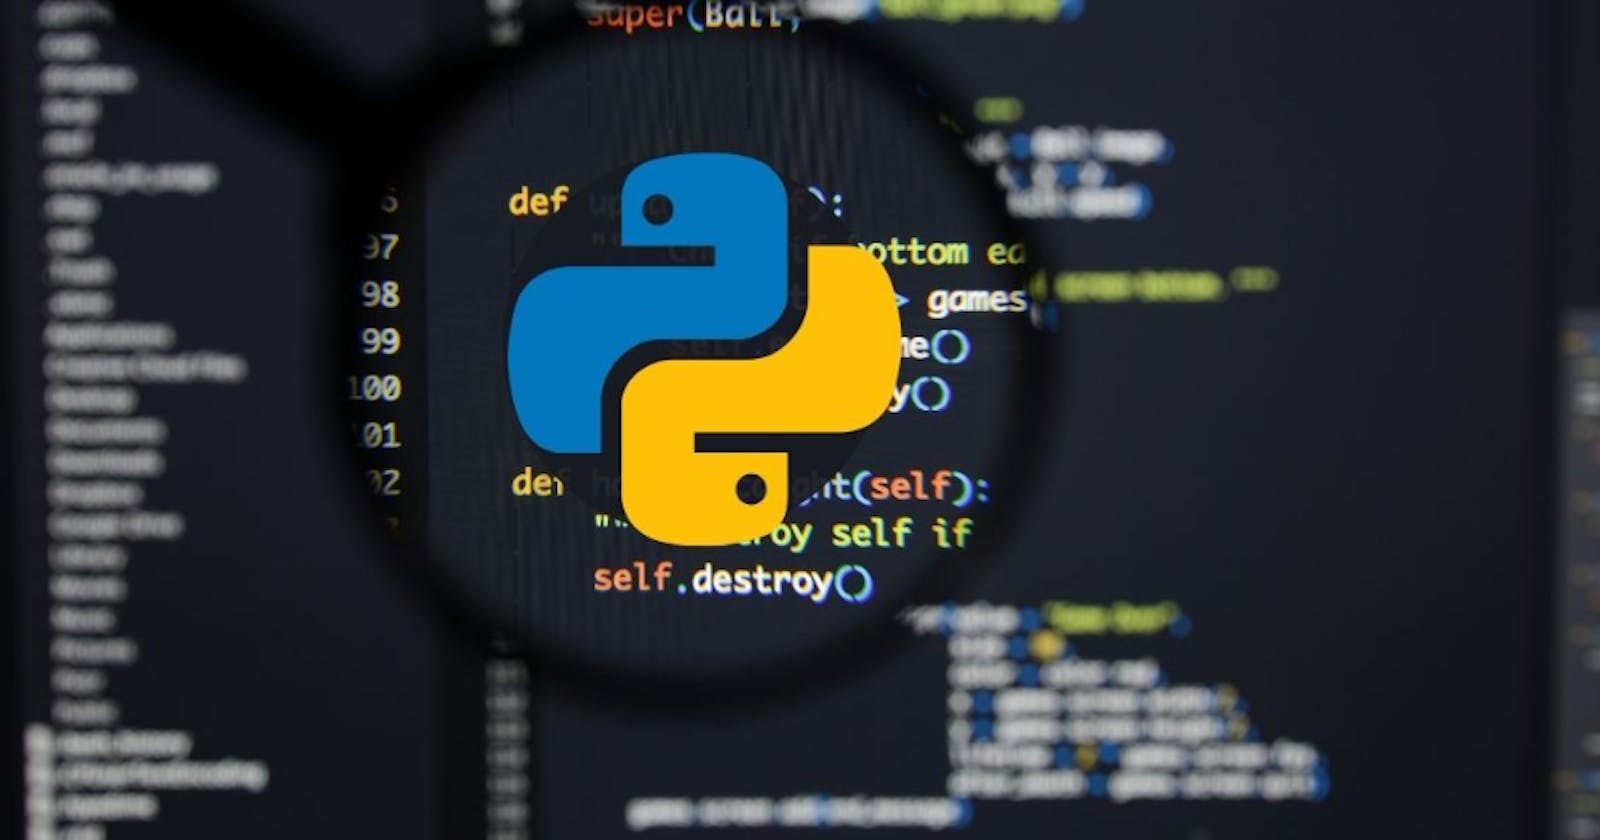 Simplifying Dependency Management: Creating a Requirements.txt File for Your Python Project